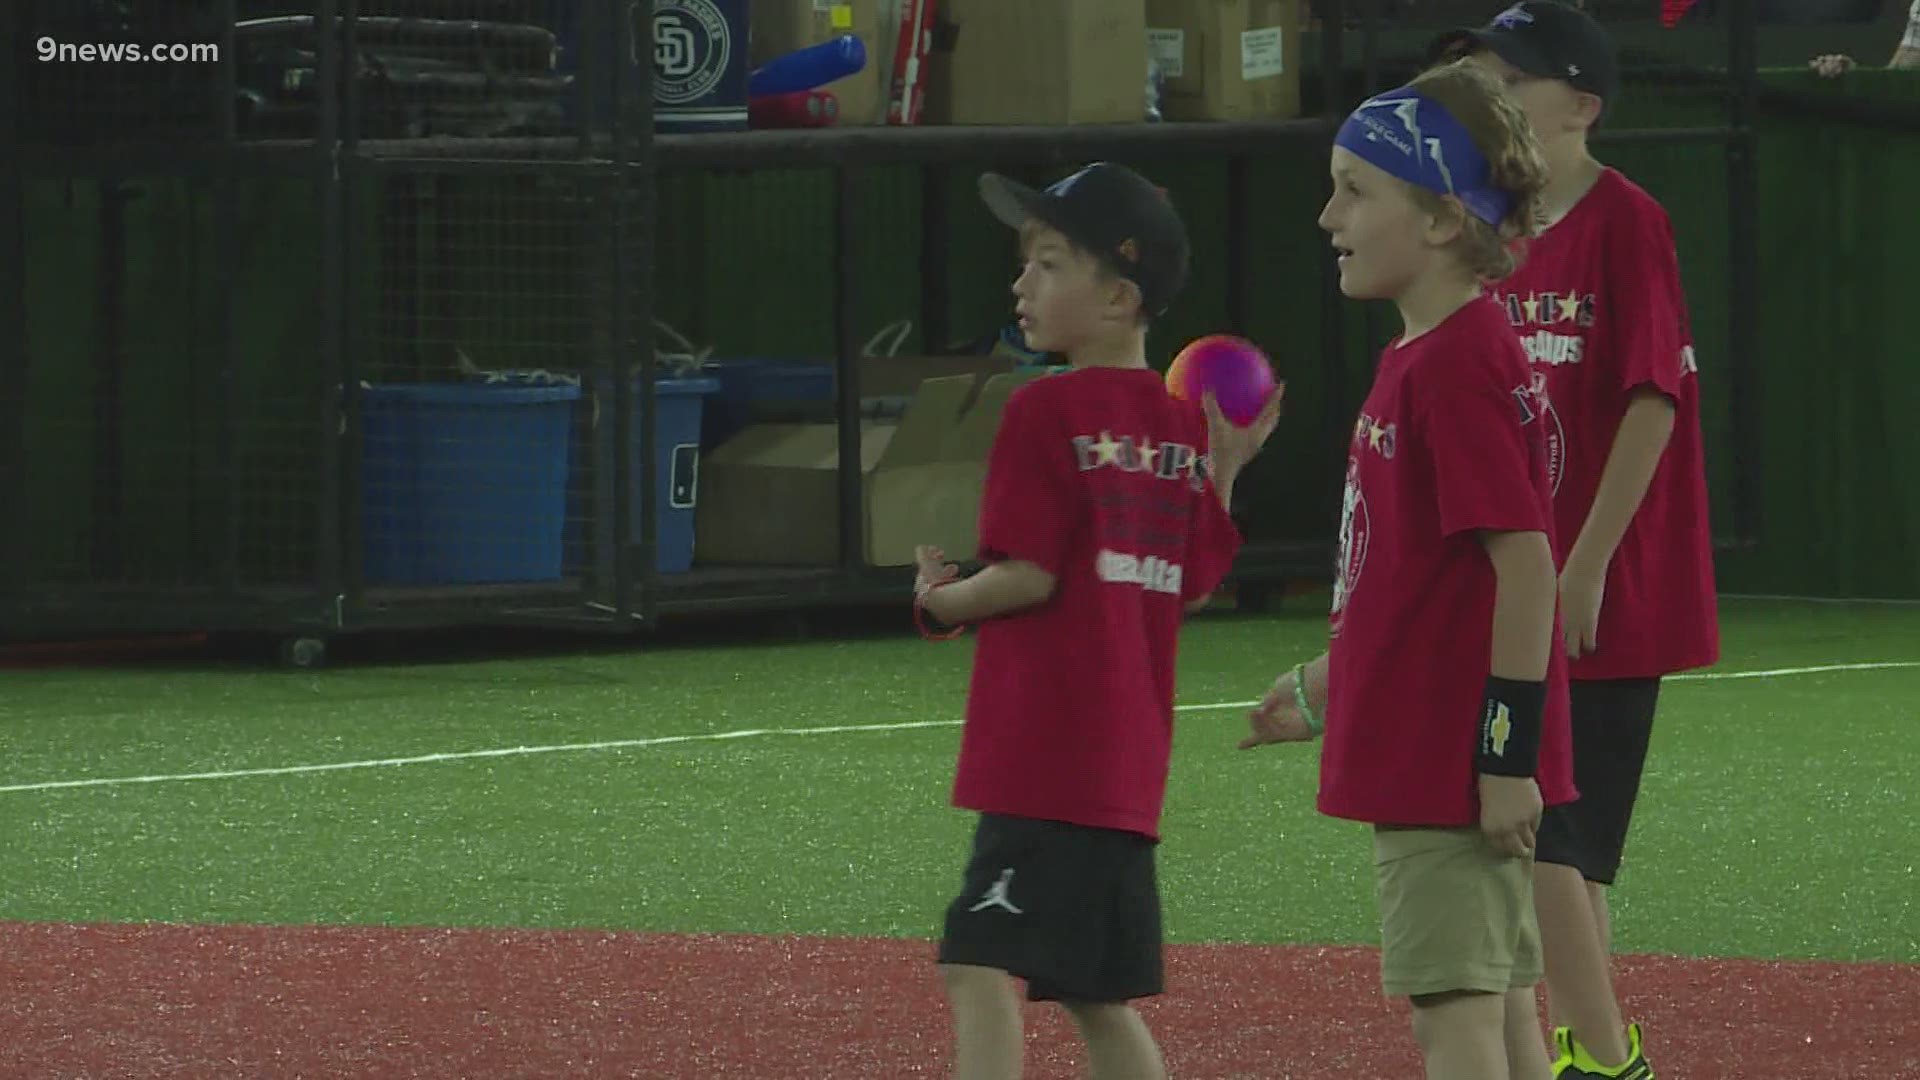 Major League Baseball partners with TAPS to help kids find bonds, support.